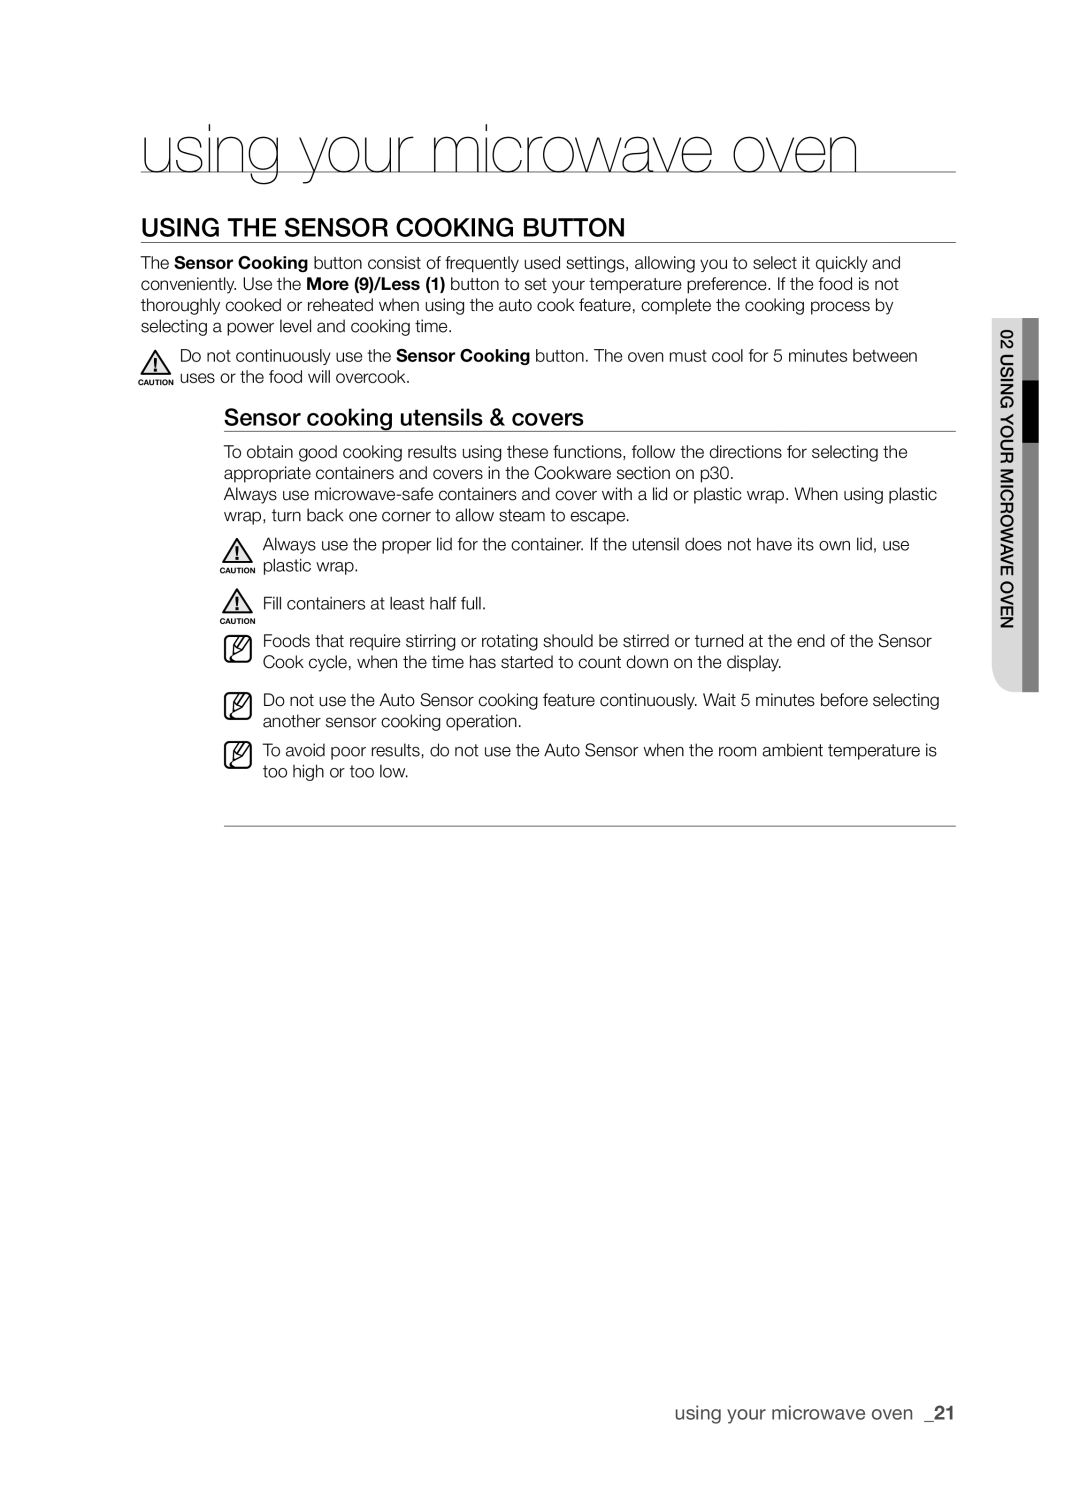 Samsung SMH9207 user manual Using the Sensor CookING button, Sensor cooking utensils & covers, using your microwave oven 